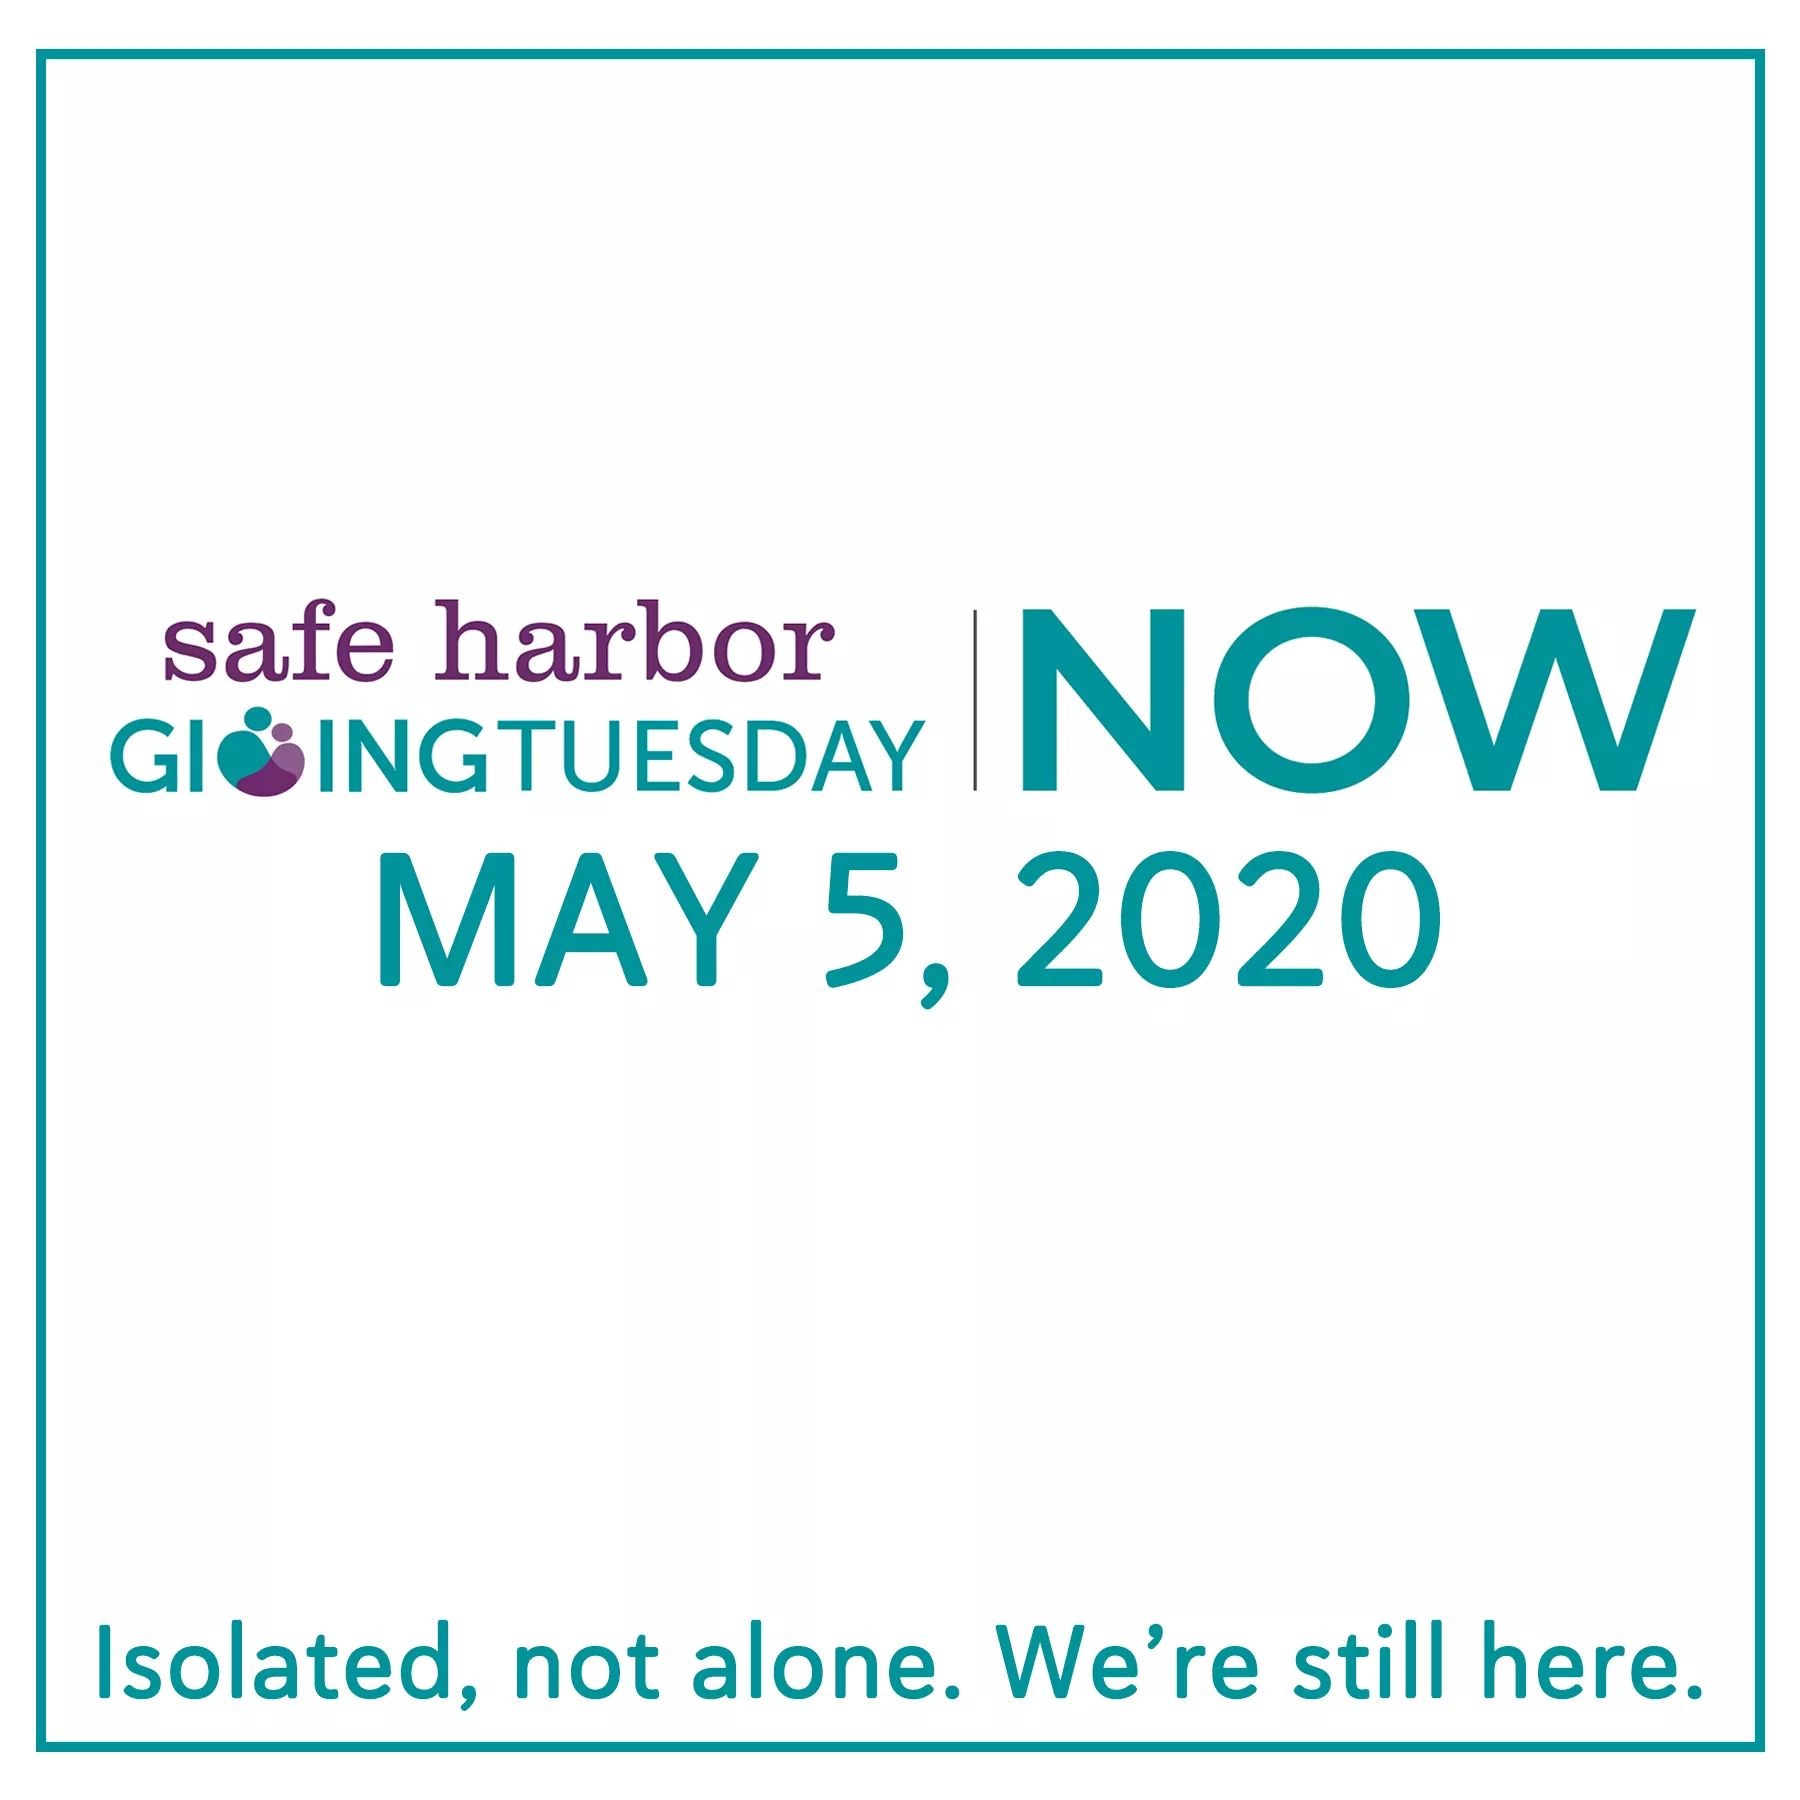 Help Us Be Here Now and In the Future #GivingTuesdayNow, May 5, 2020